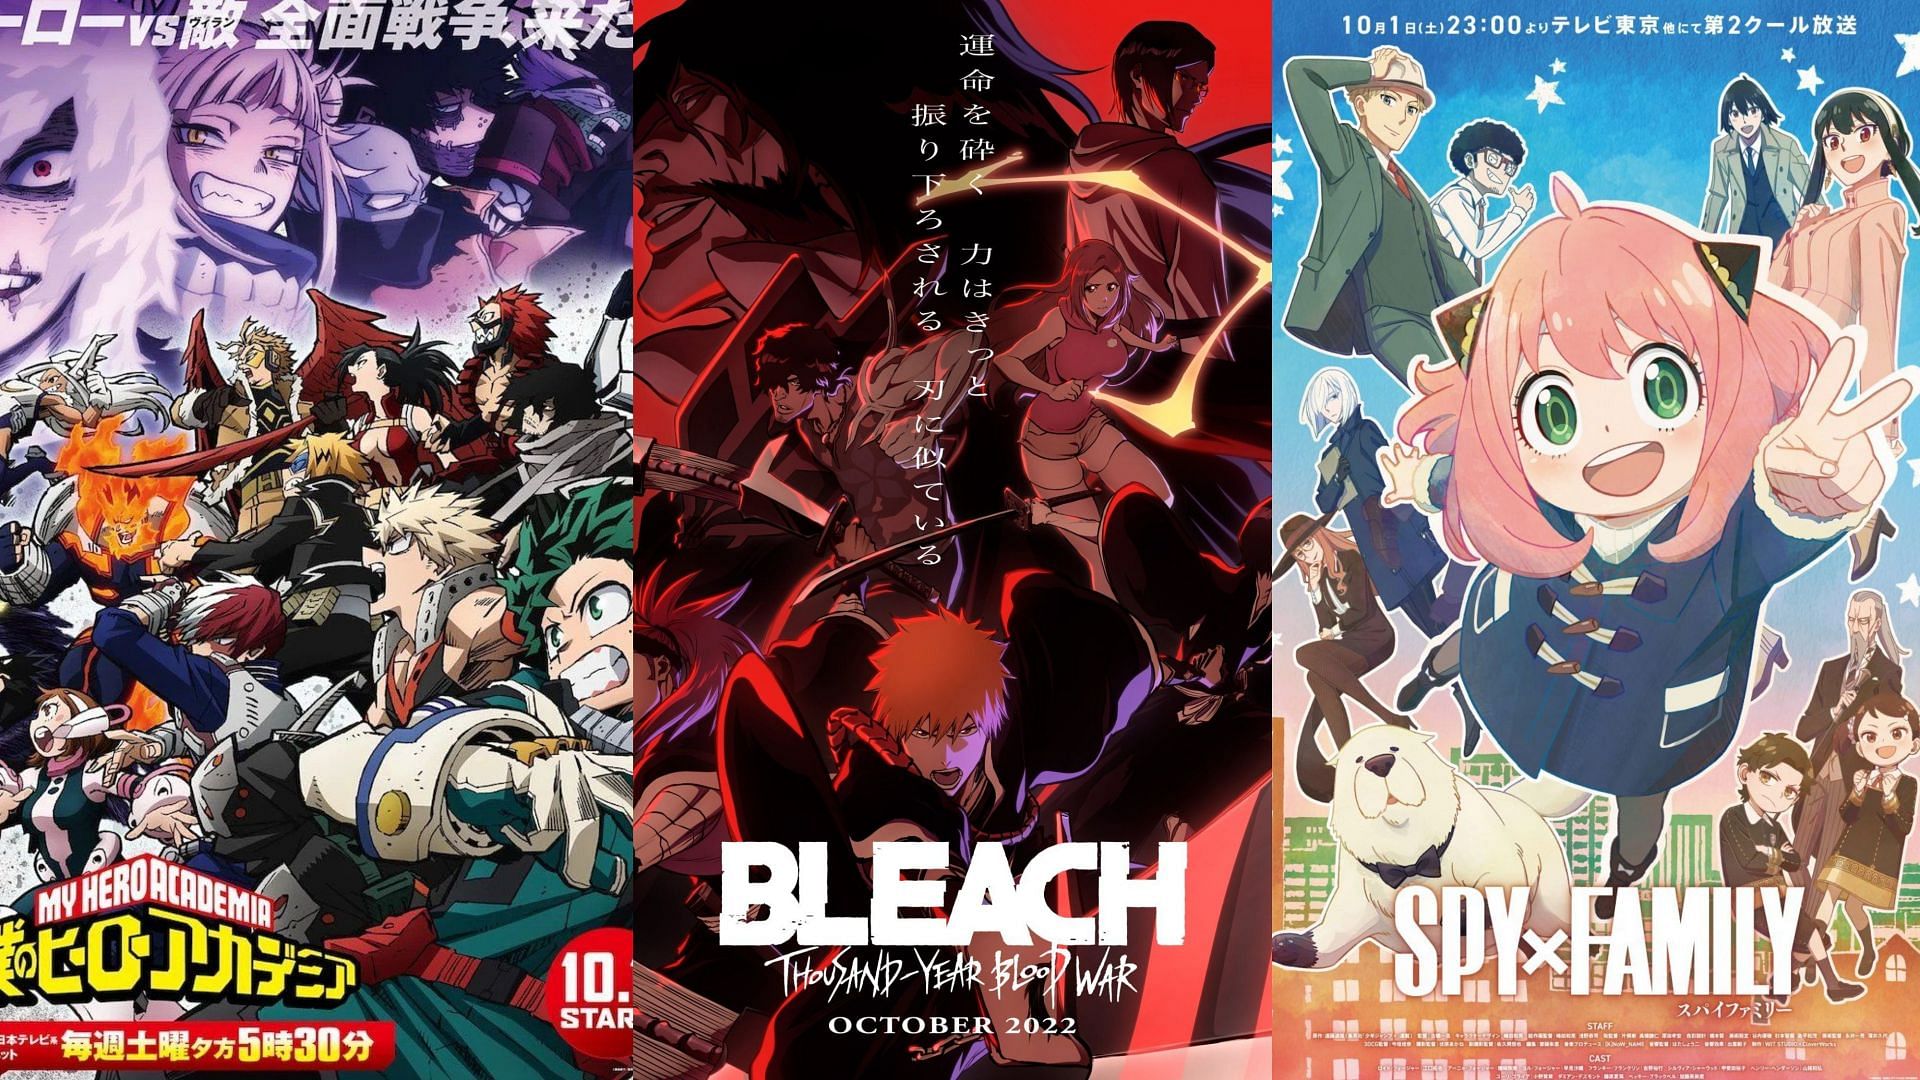 My Hero Academia, Bleach, and other popular anime release dates this October